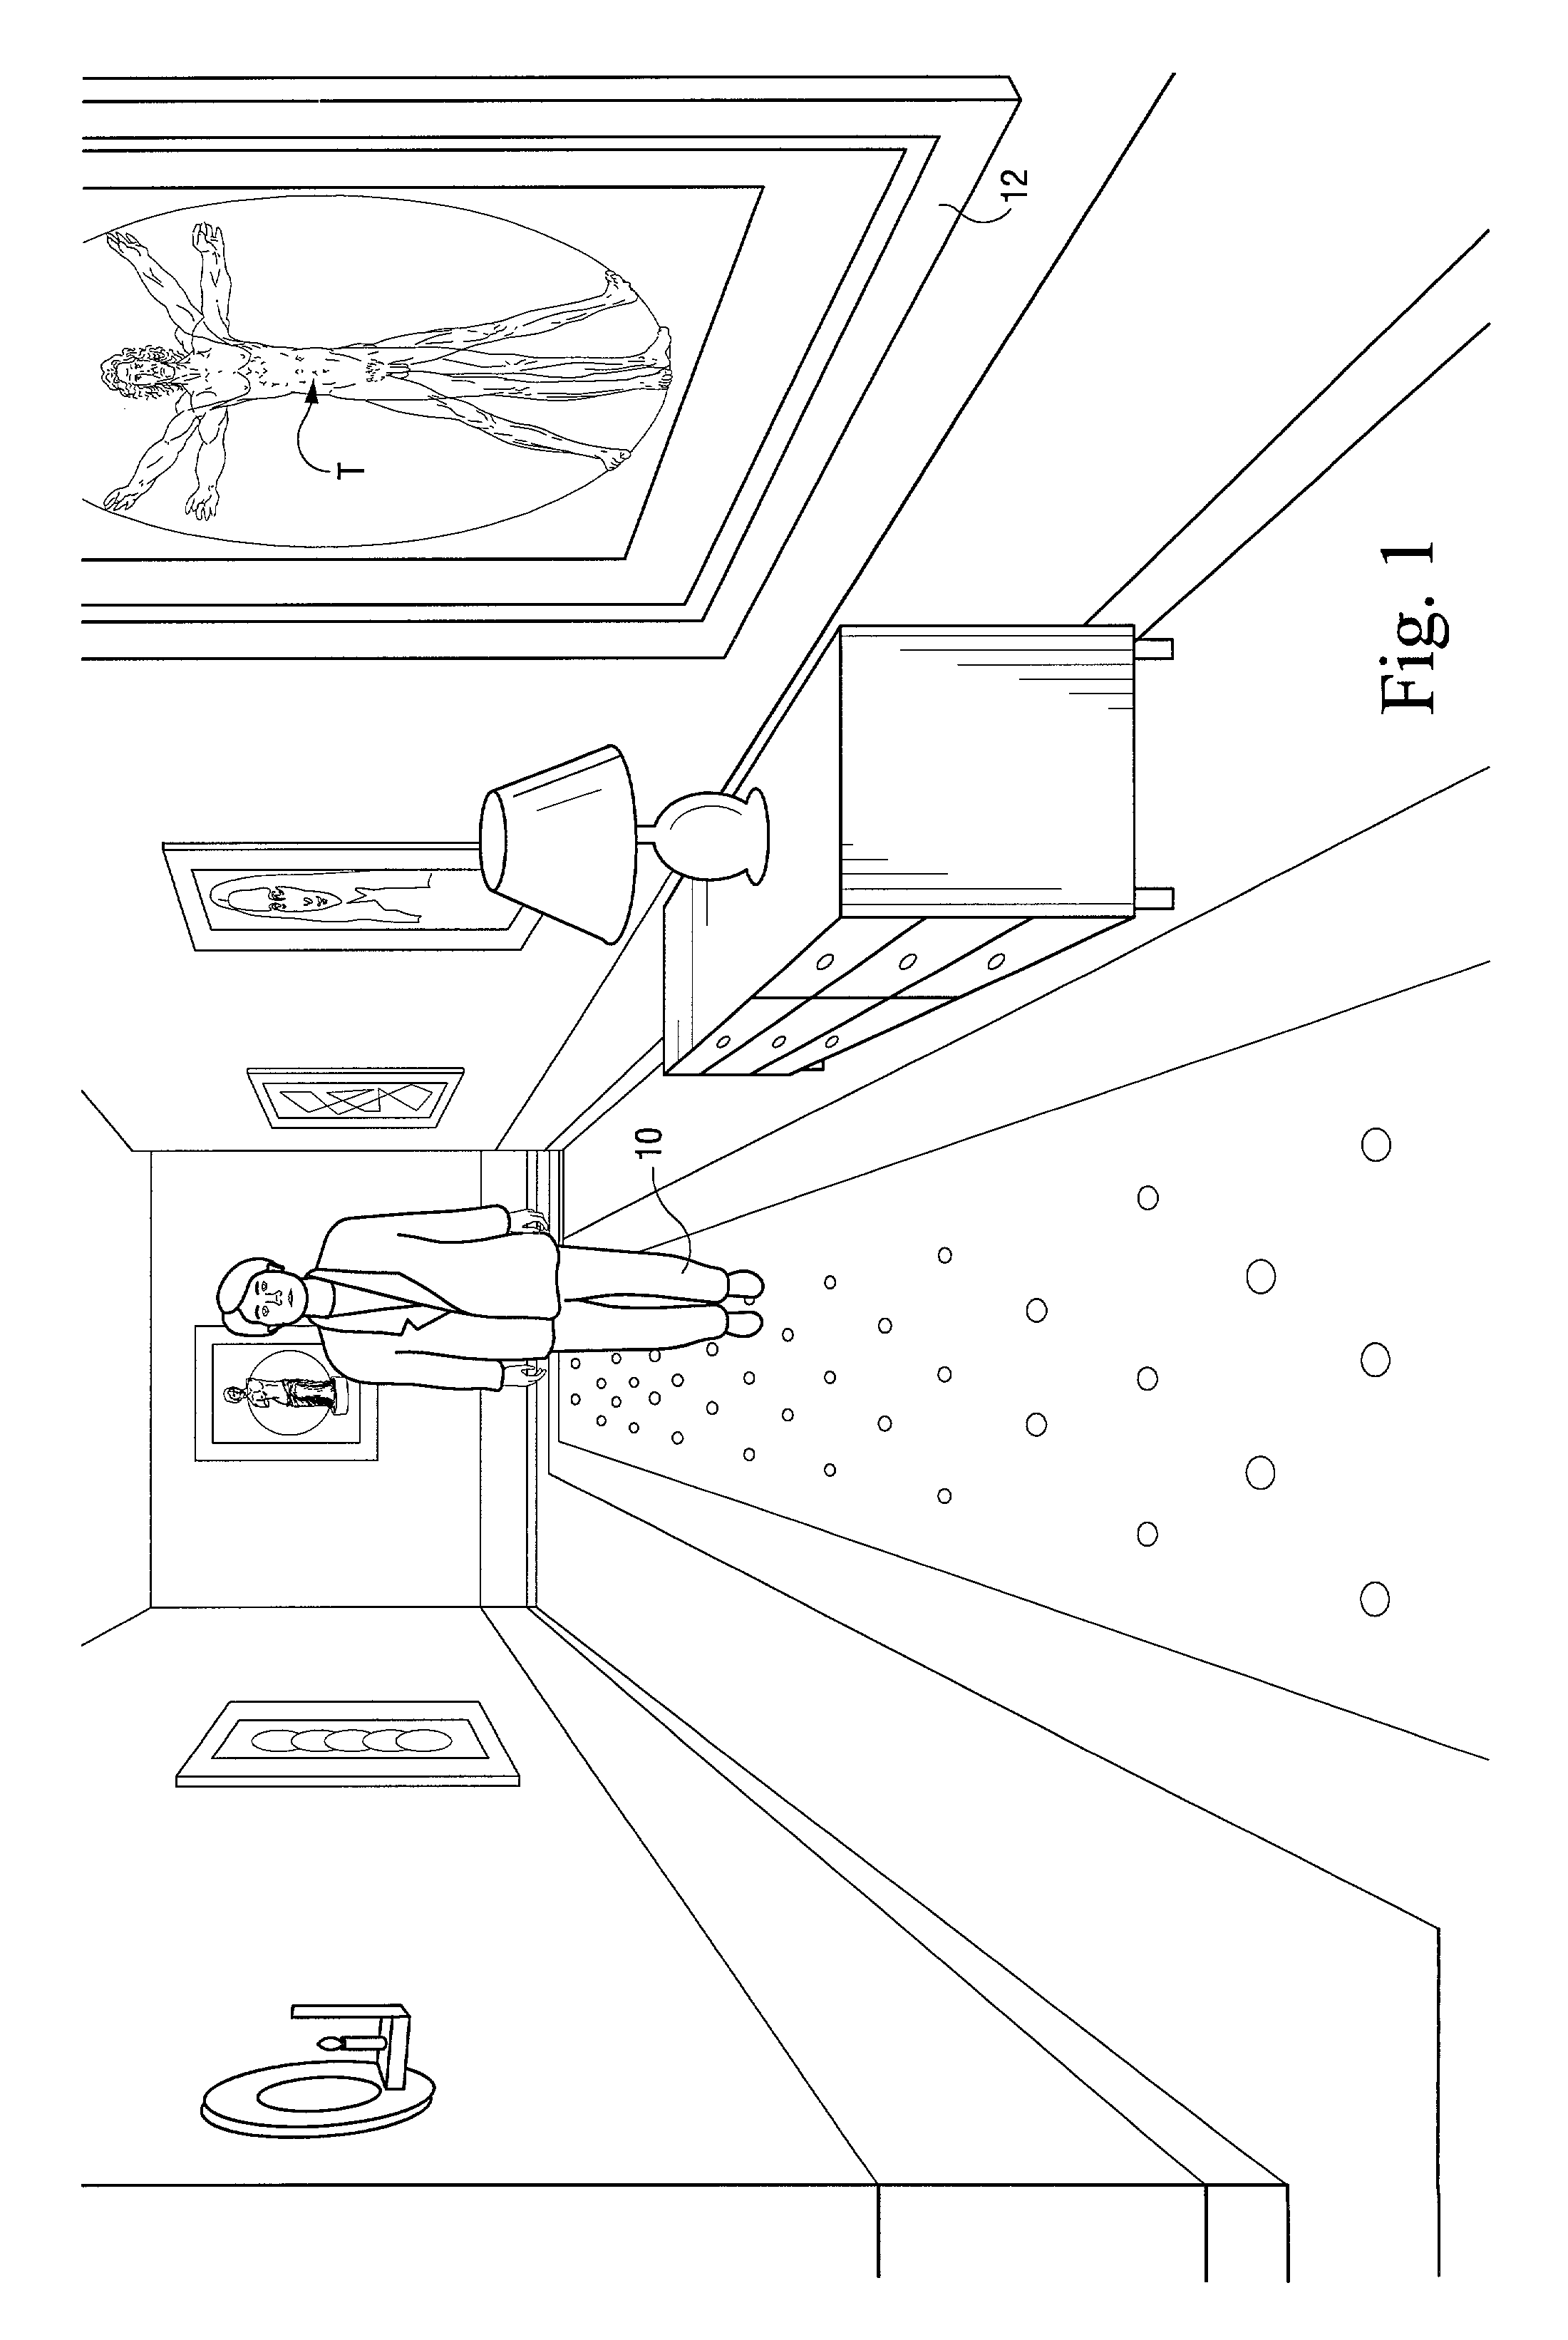 System and method for controlling animation by tagging objects within a game environment